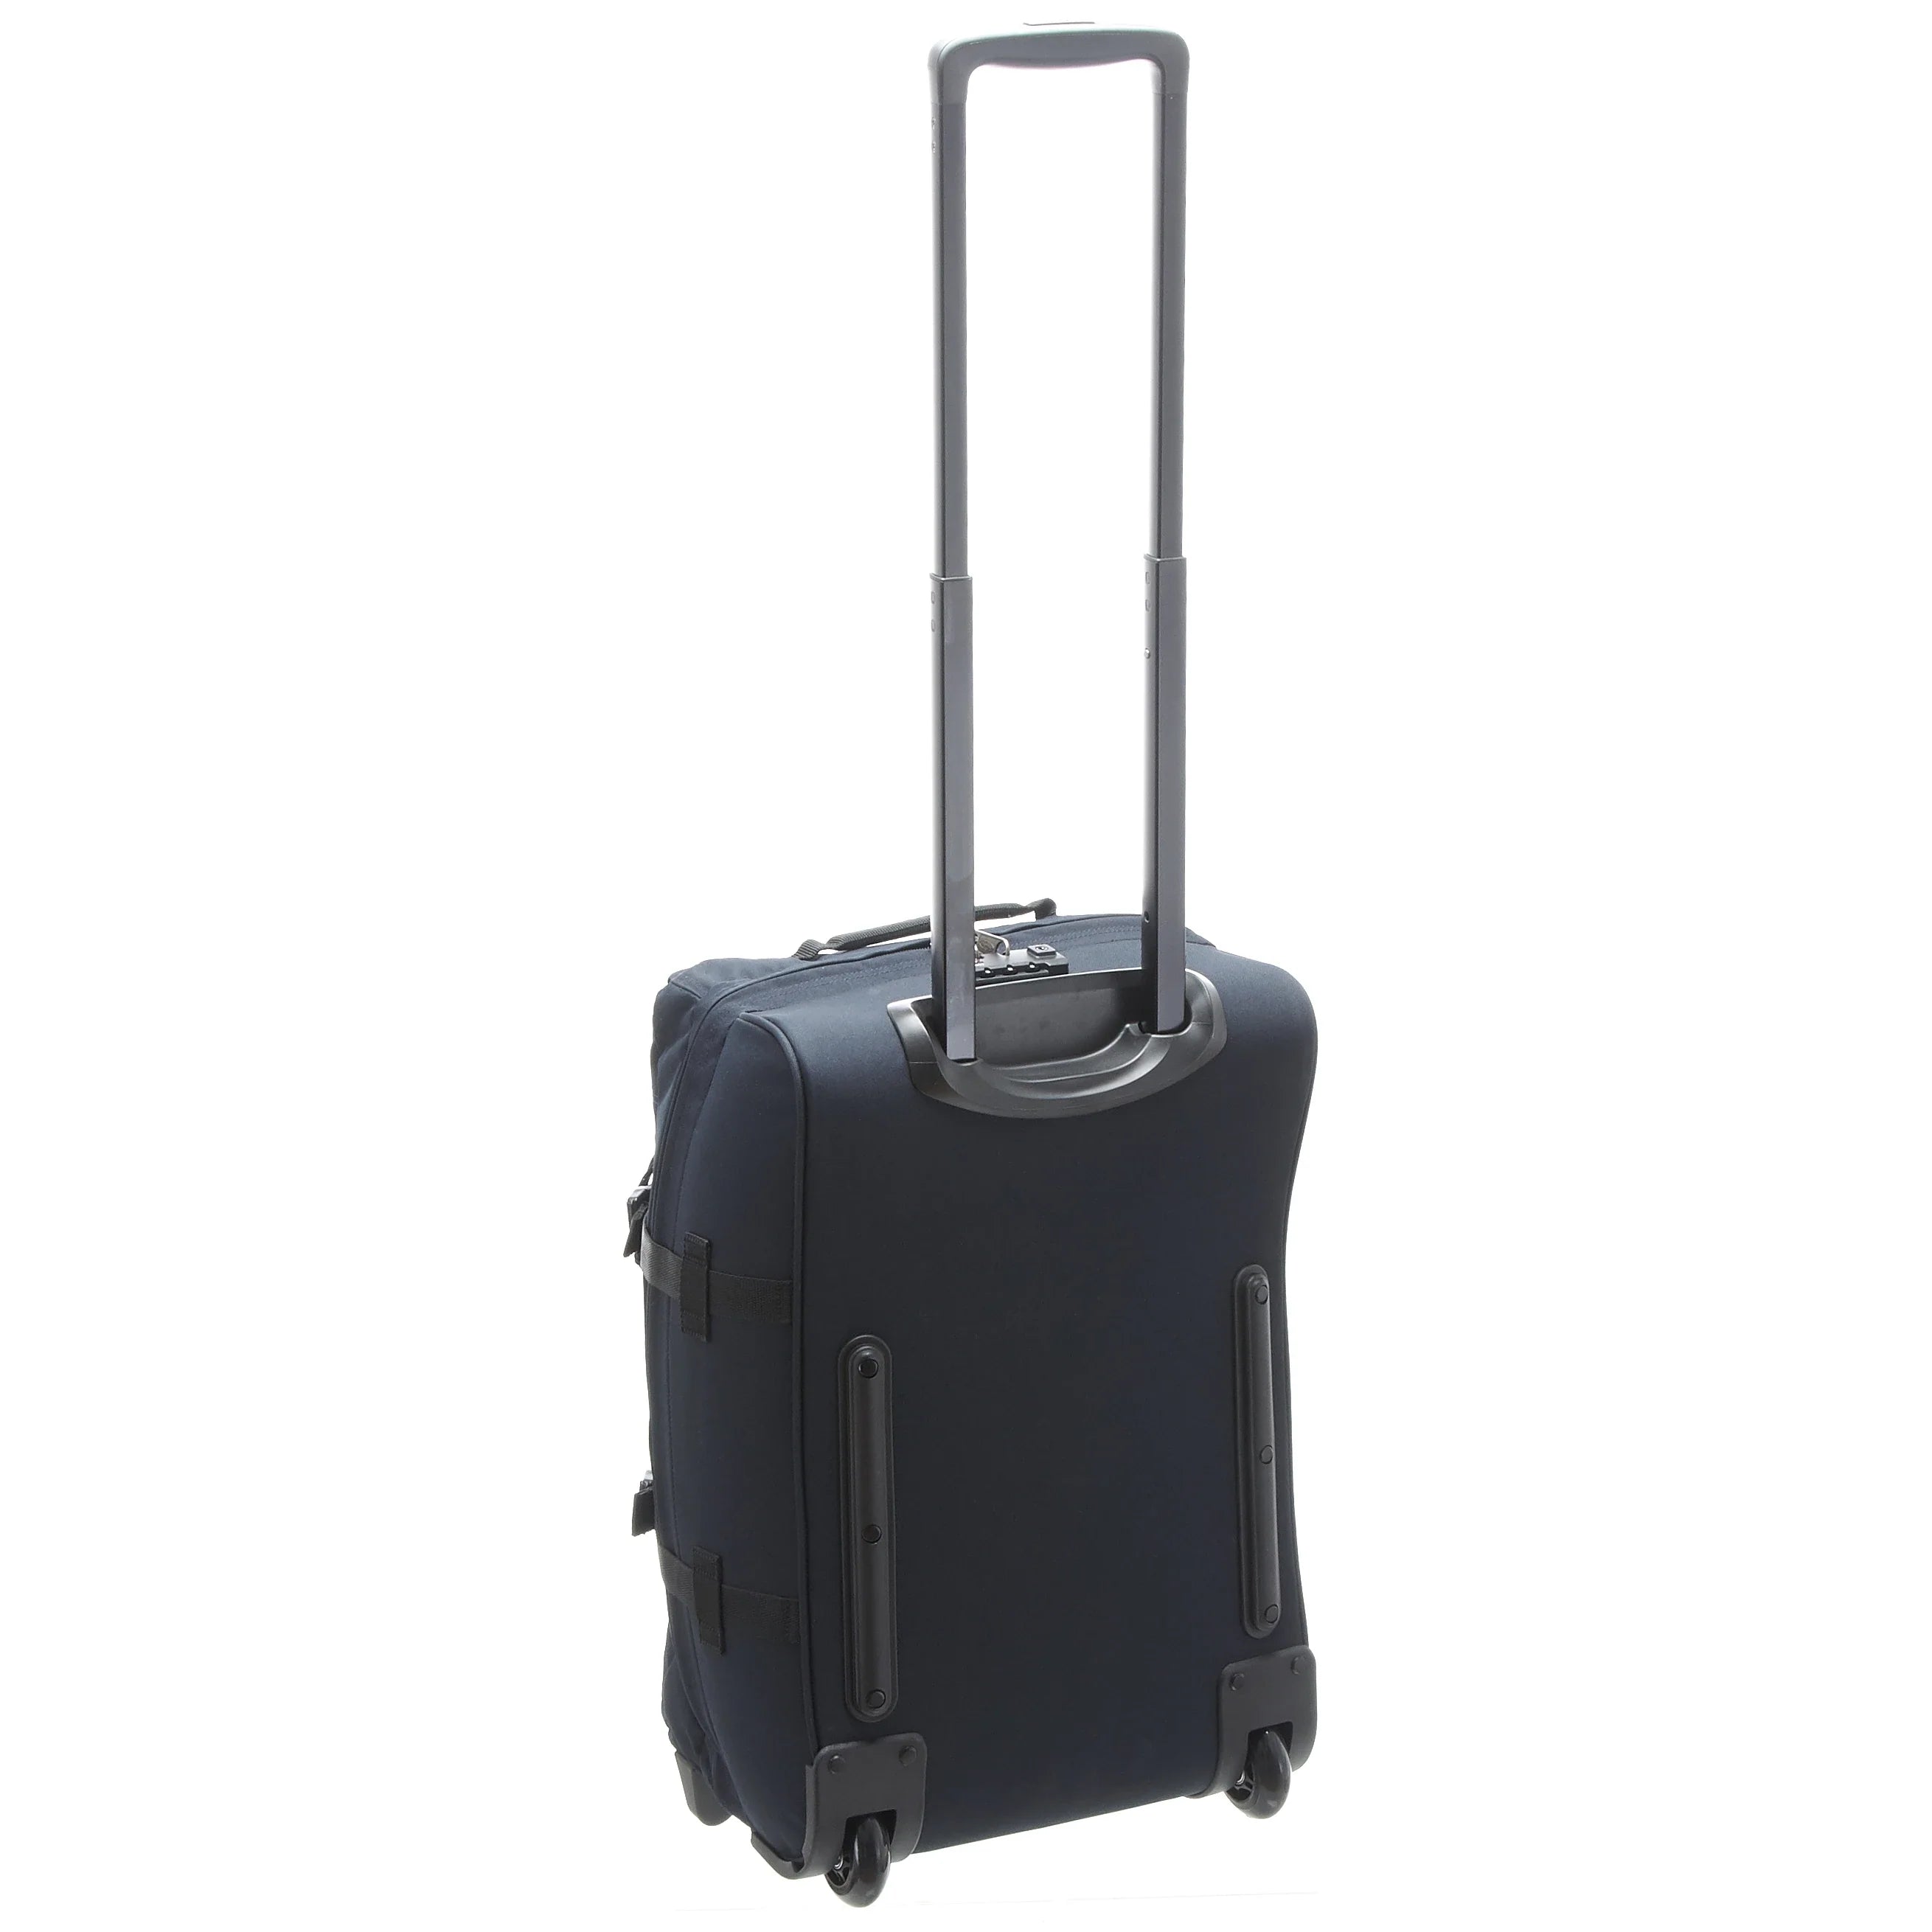 Eastpak Authentic Travel Tranverz 2-roll cabin trolley 51 cm - sunday gray